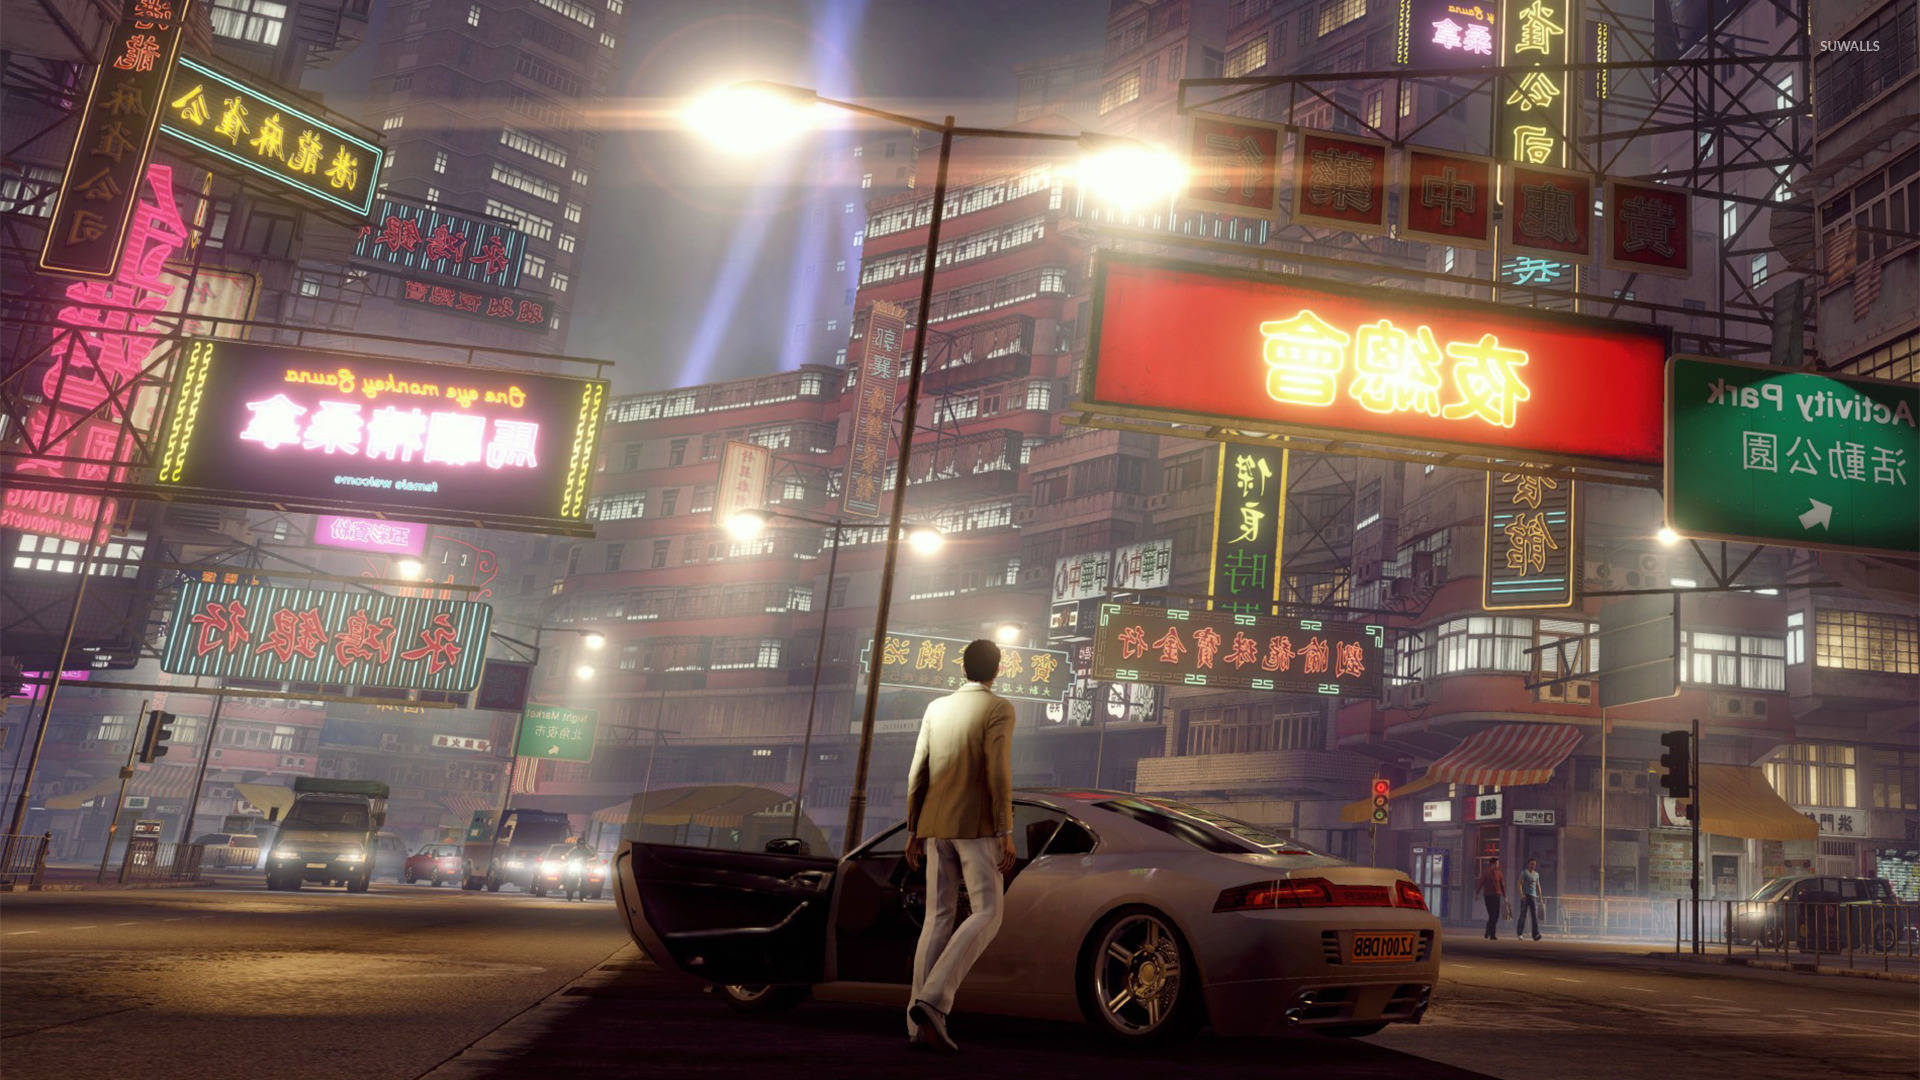 It's time to take on the criminal underworld in Sleeping Dogs! Wallpaper